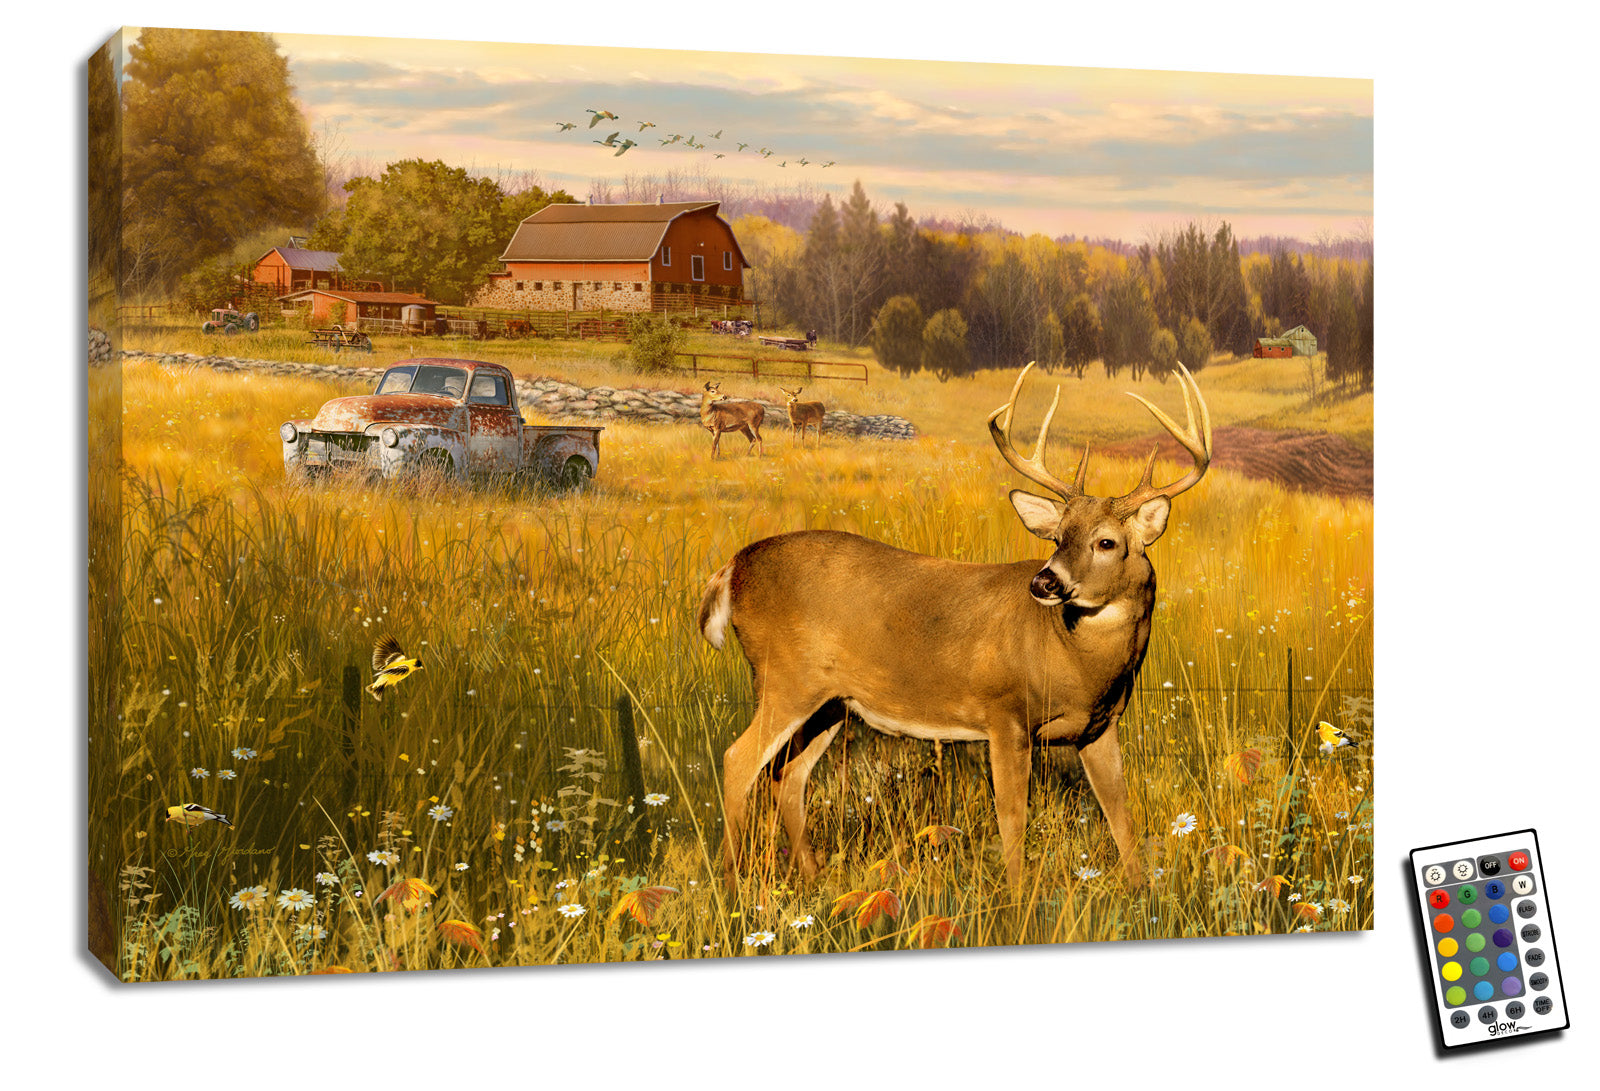  With its stunning imagery of a majestic deer amidst a serene landscape, this artwork will transport you to a world of love and romance.  The intricate details of the rusted truck and the charming farm in the background add to the artwork's rustic and nostalgic feel.